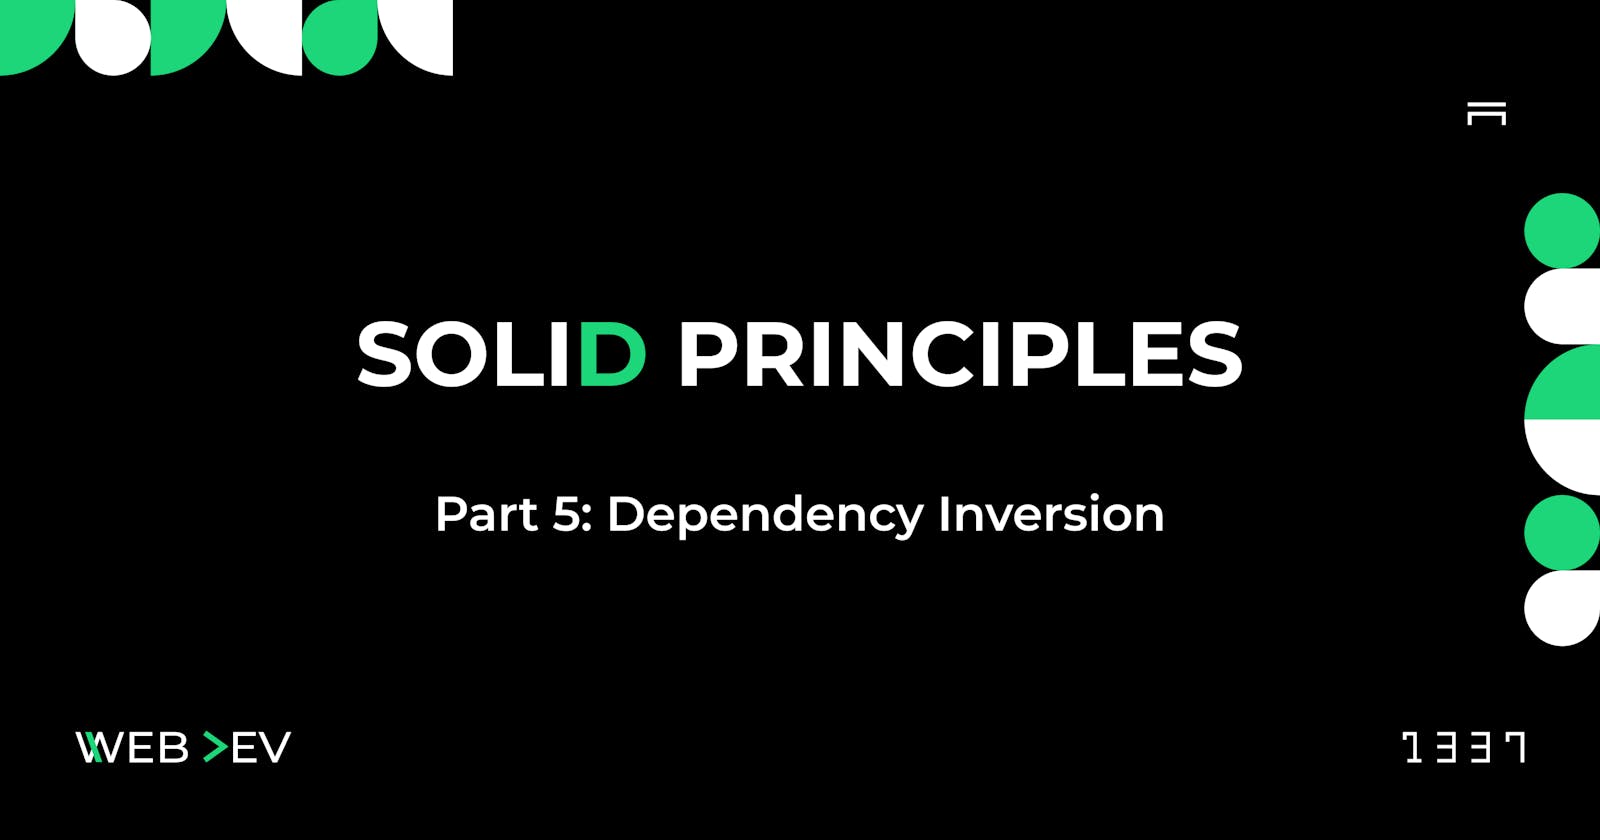 The SOLID Principles - Dependency Inversion